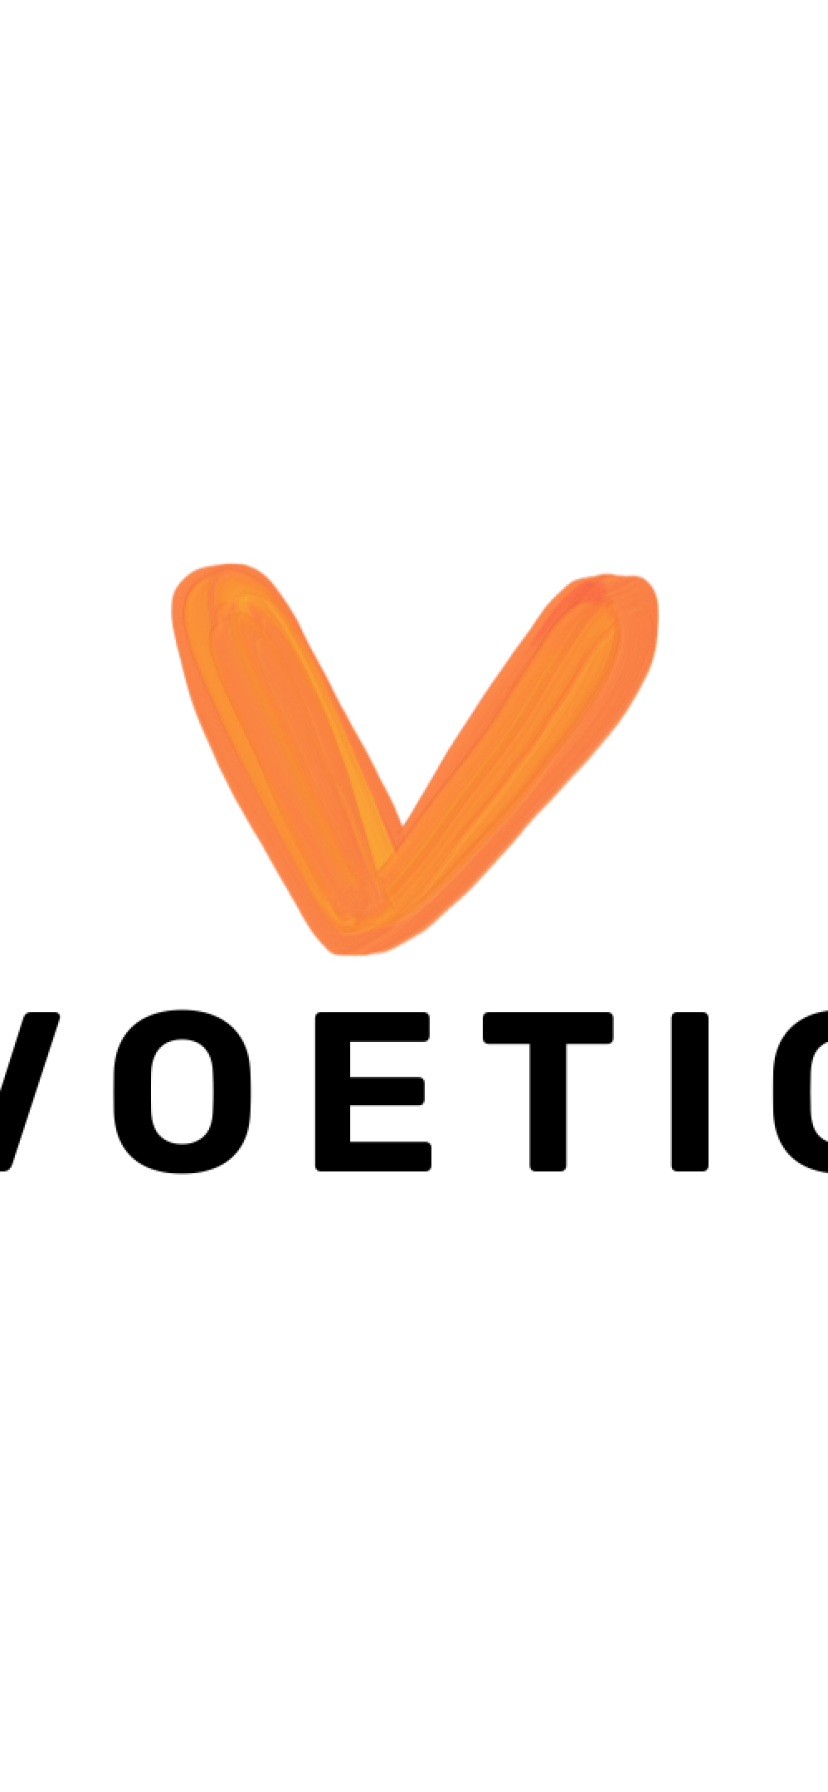 Voetic.com domain name for sale